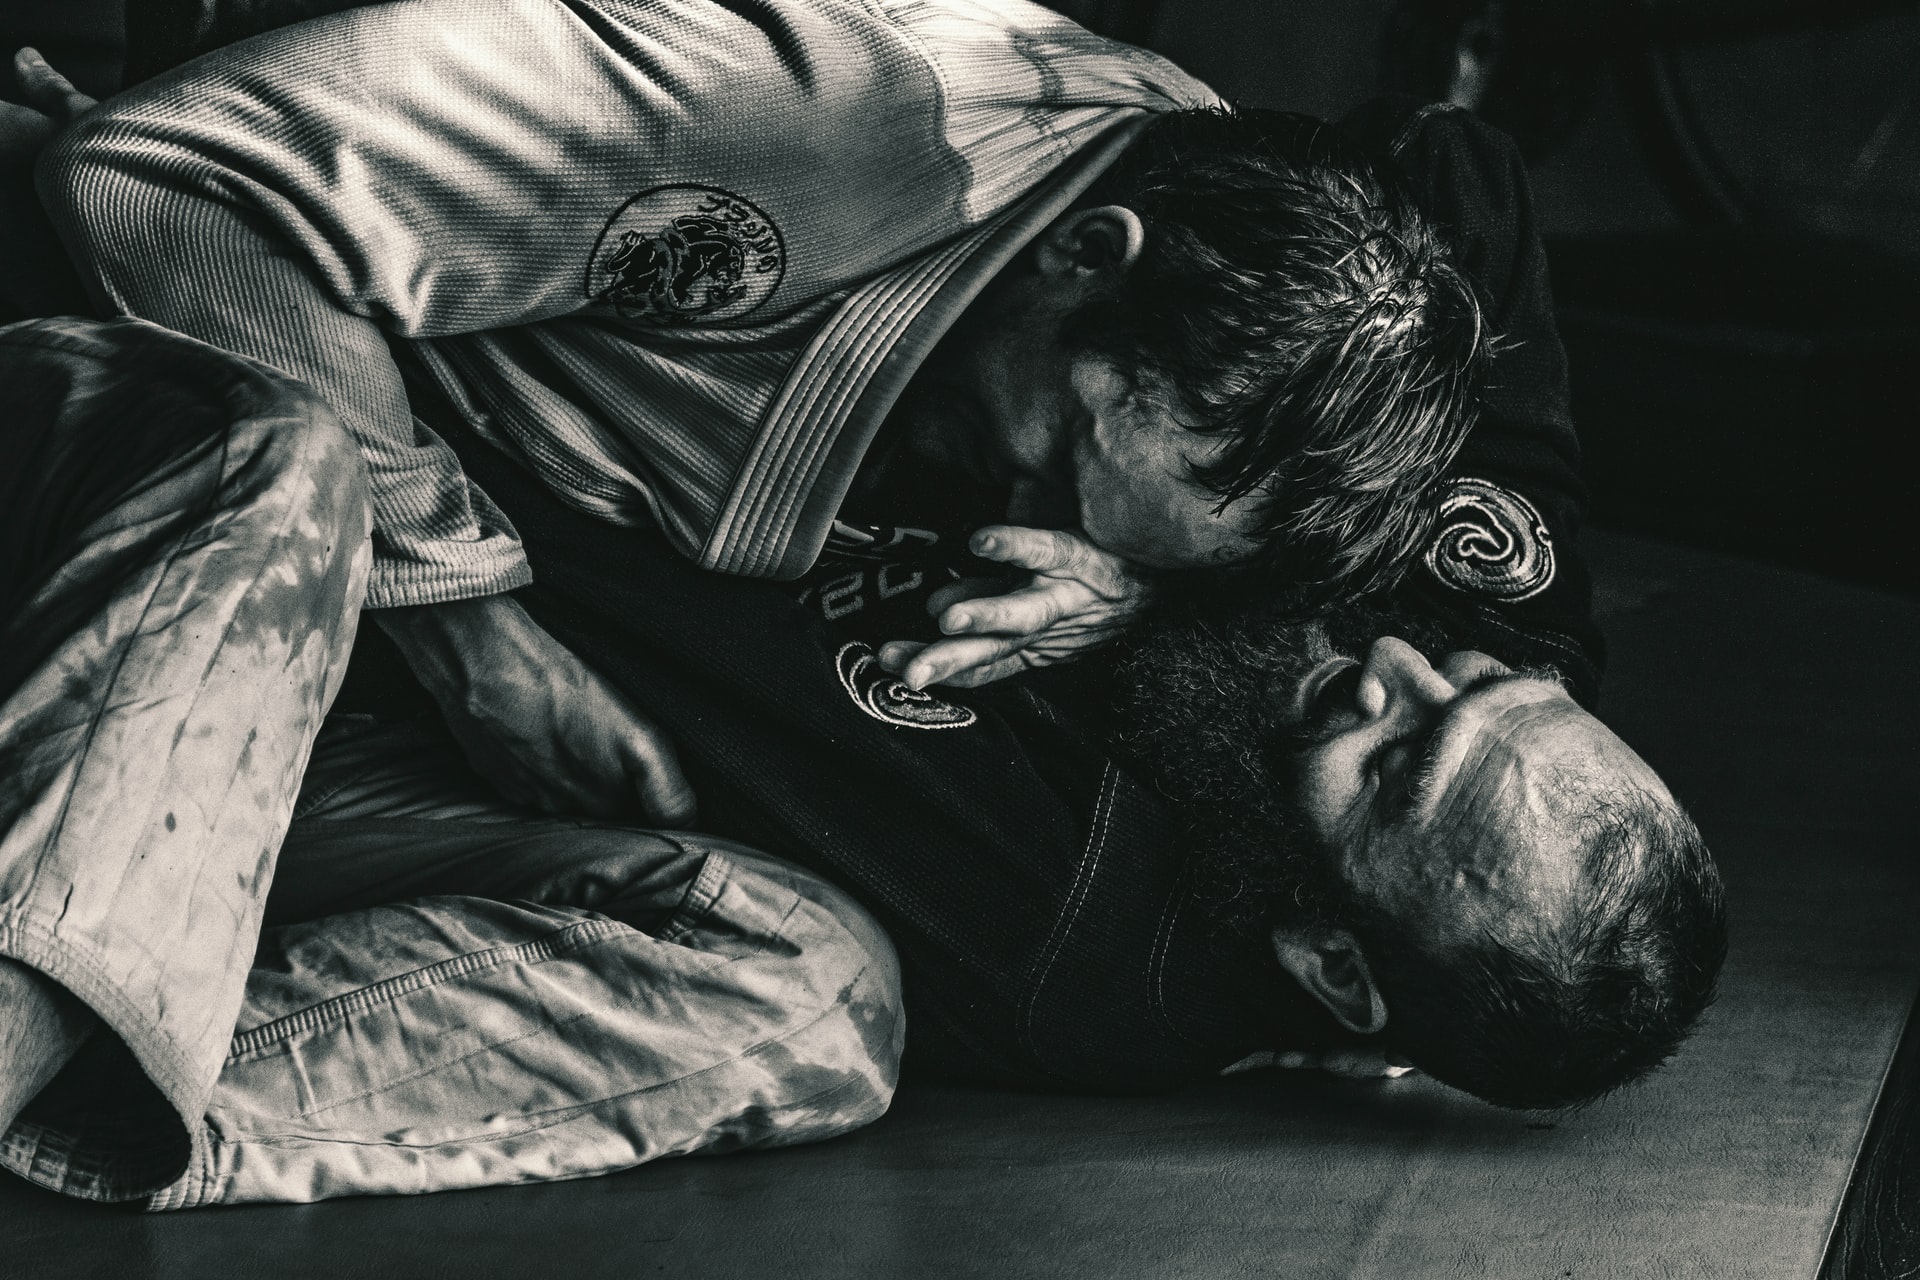 Comparing Air Choke Vs Blood Choke: Safer, Easier & How To